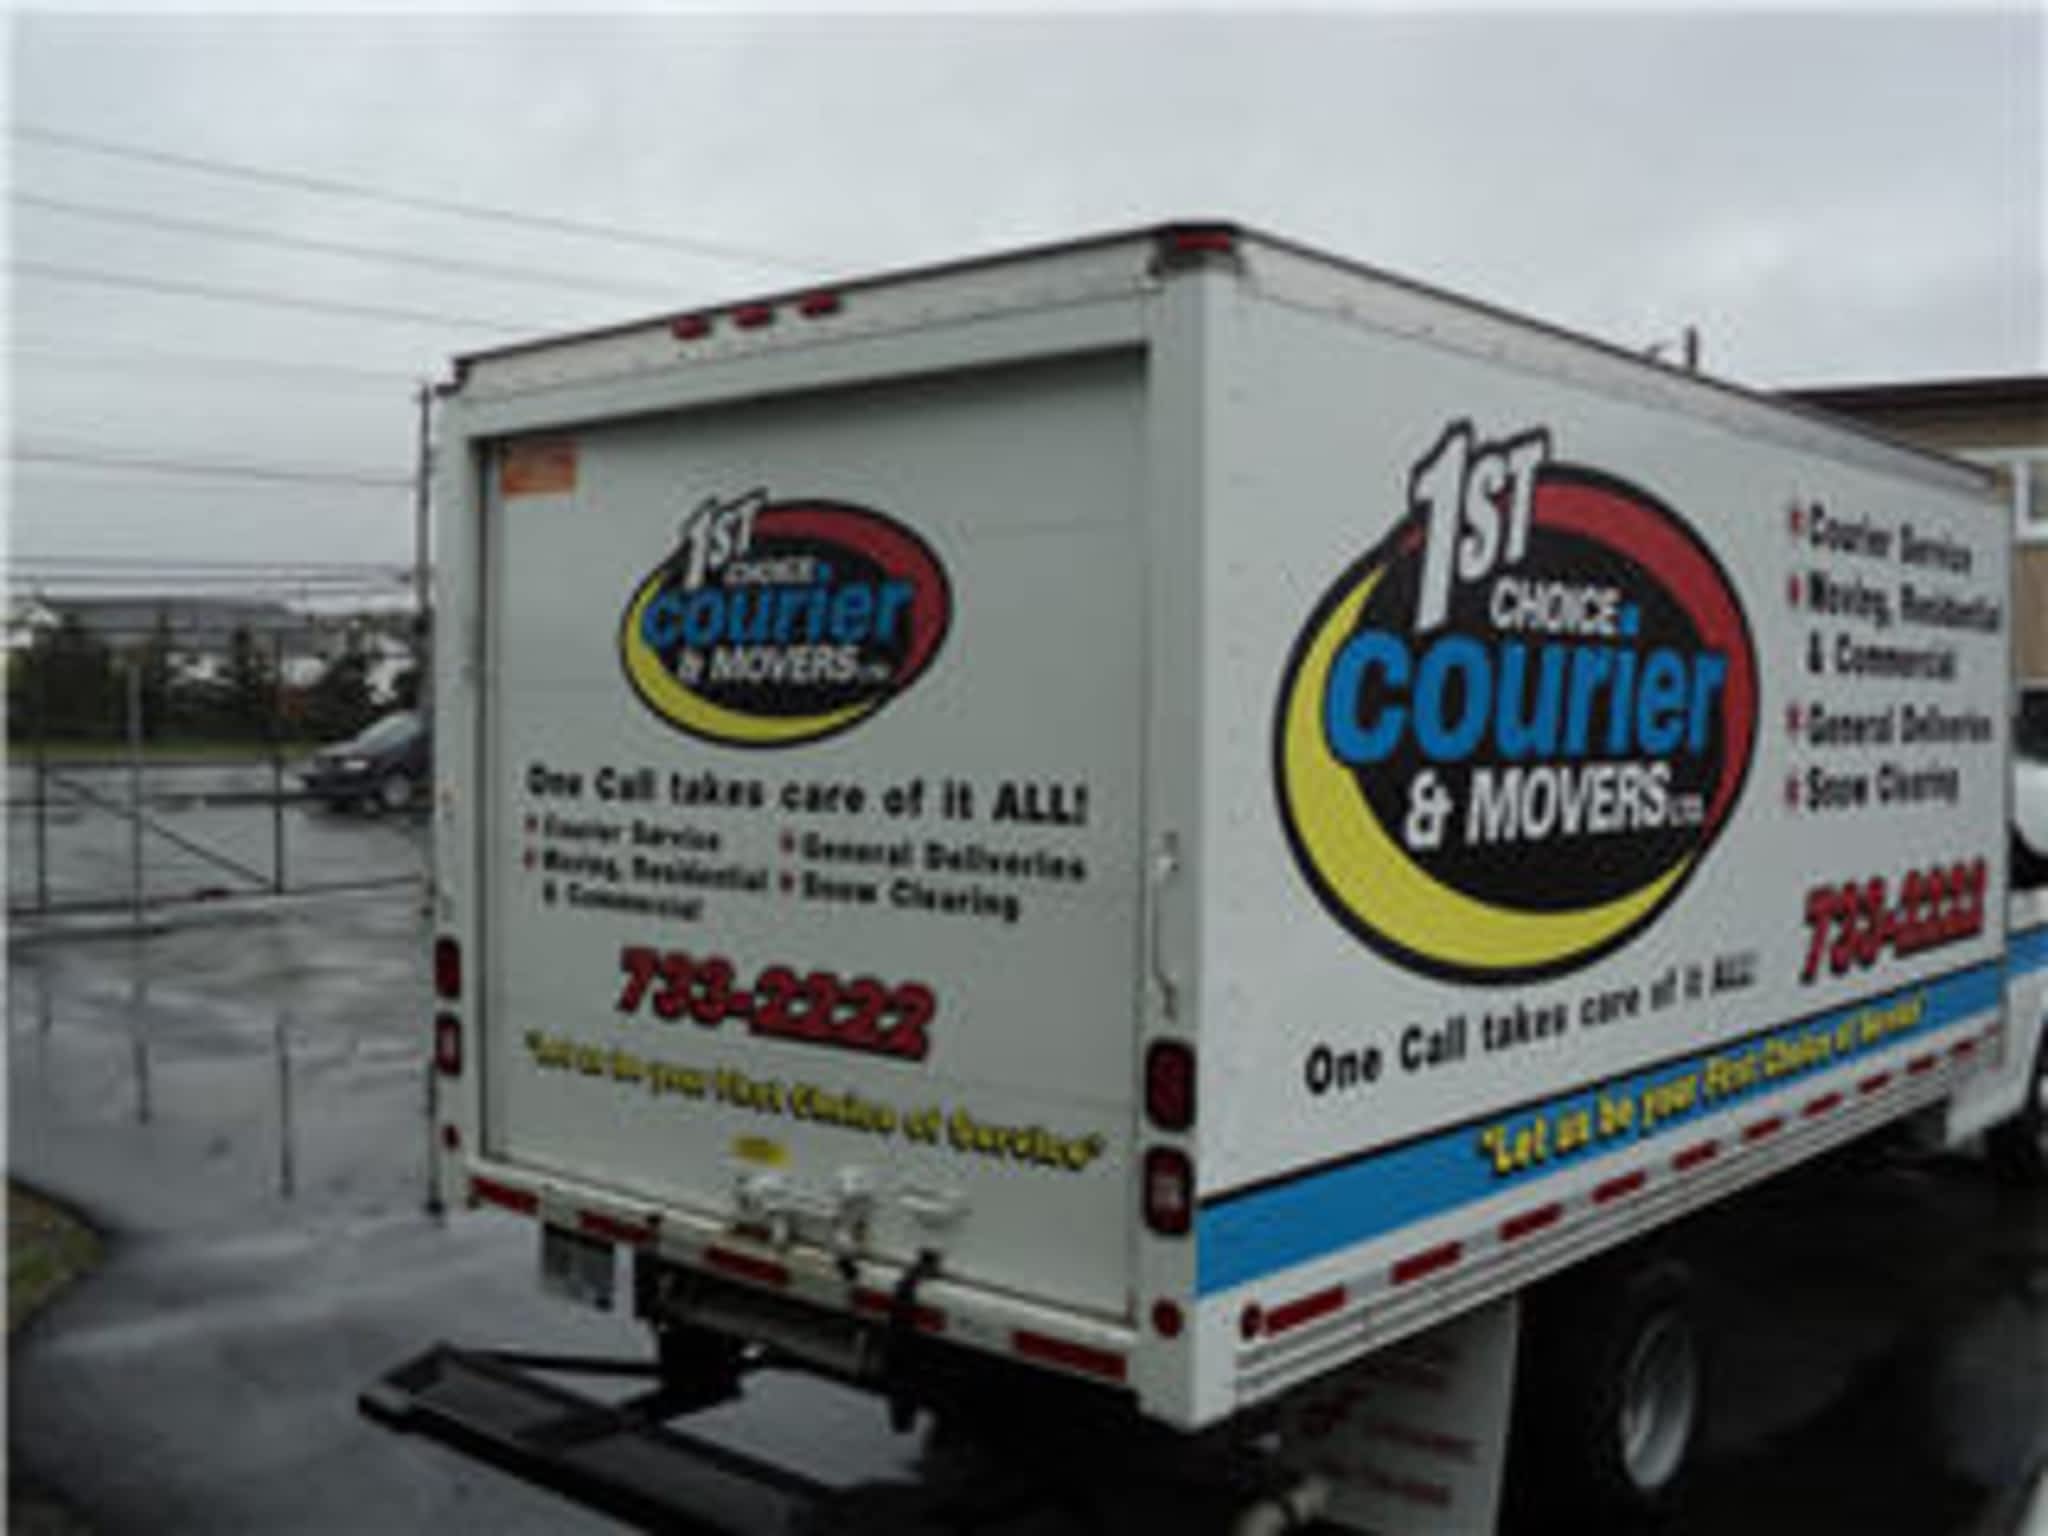 photo First Choice Courier & Movers Ltd